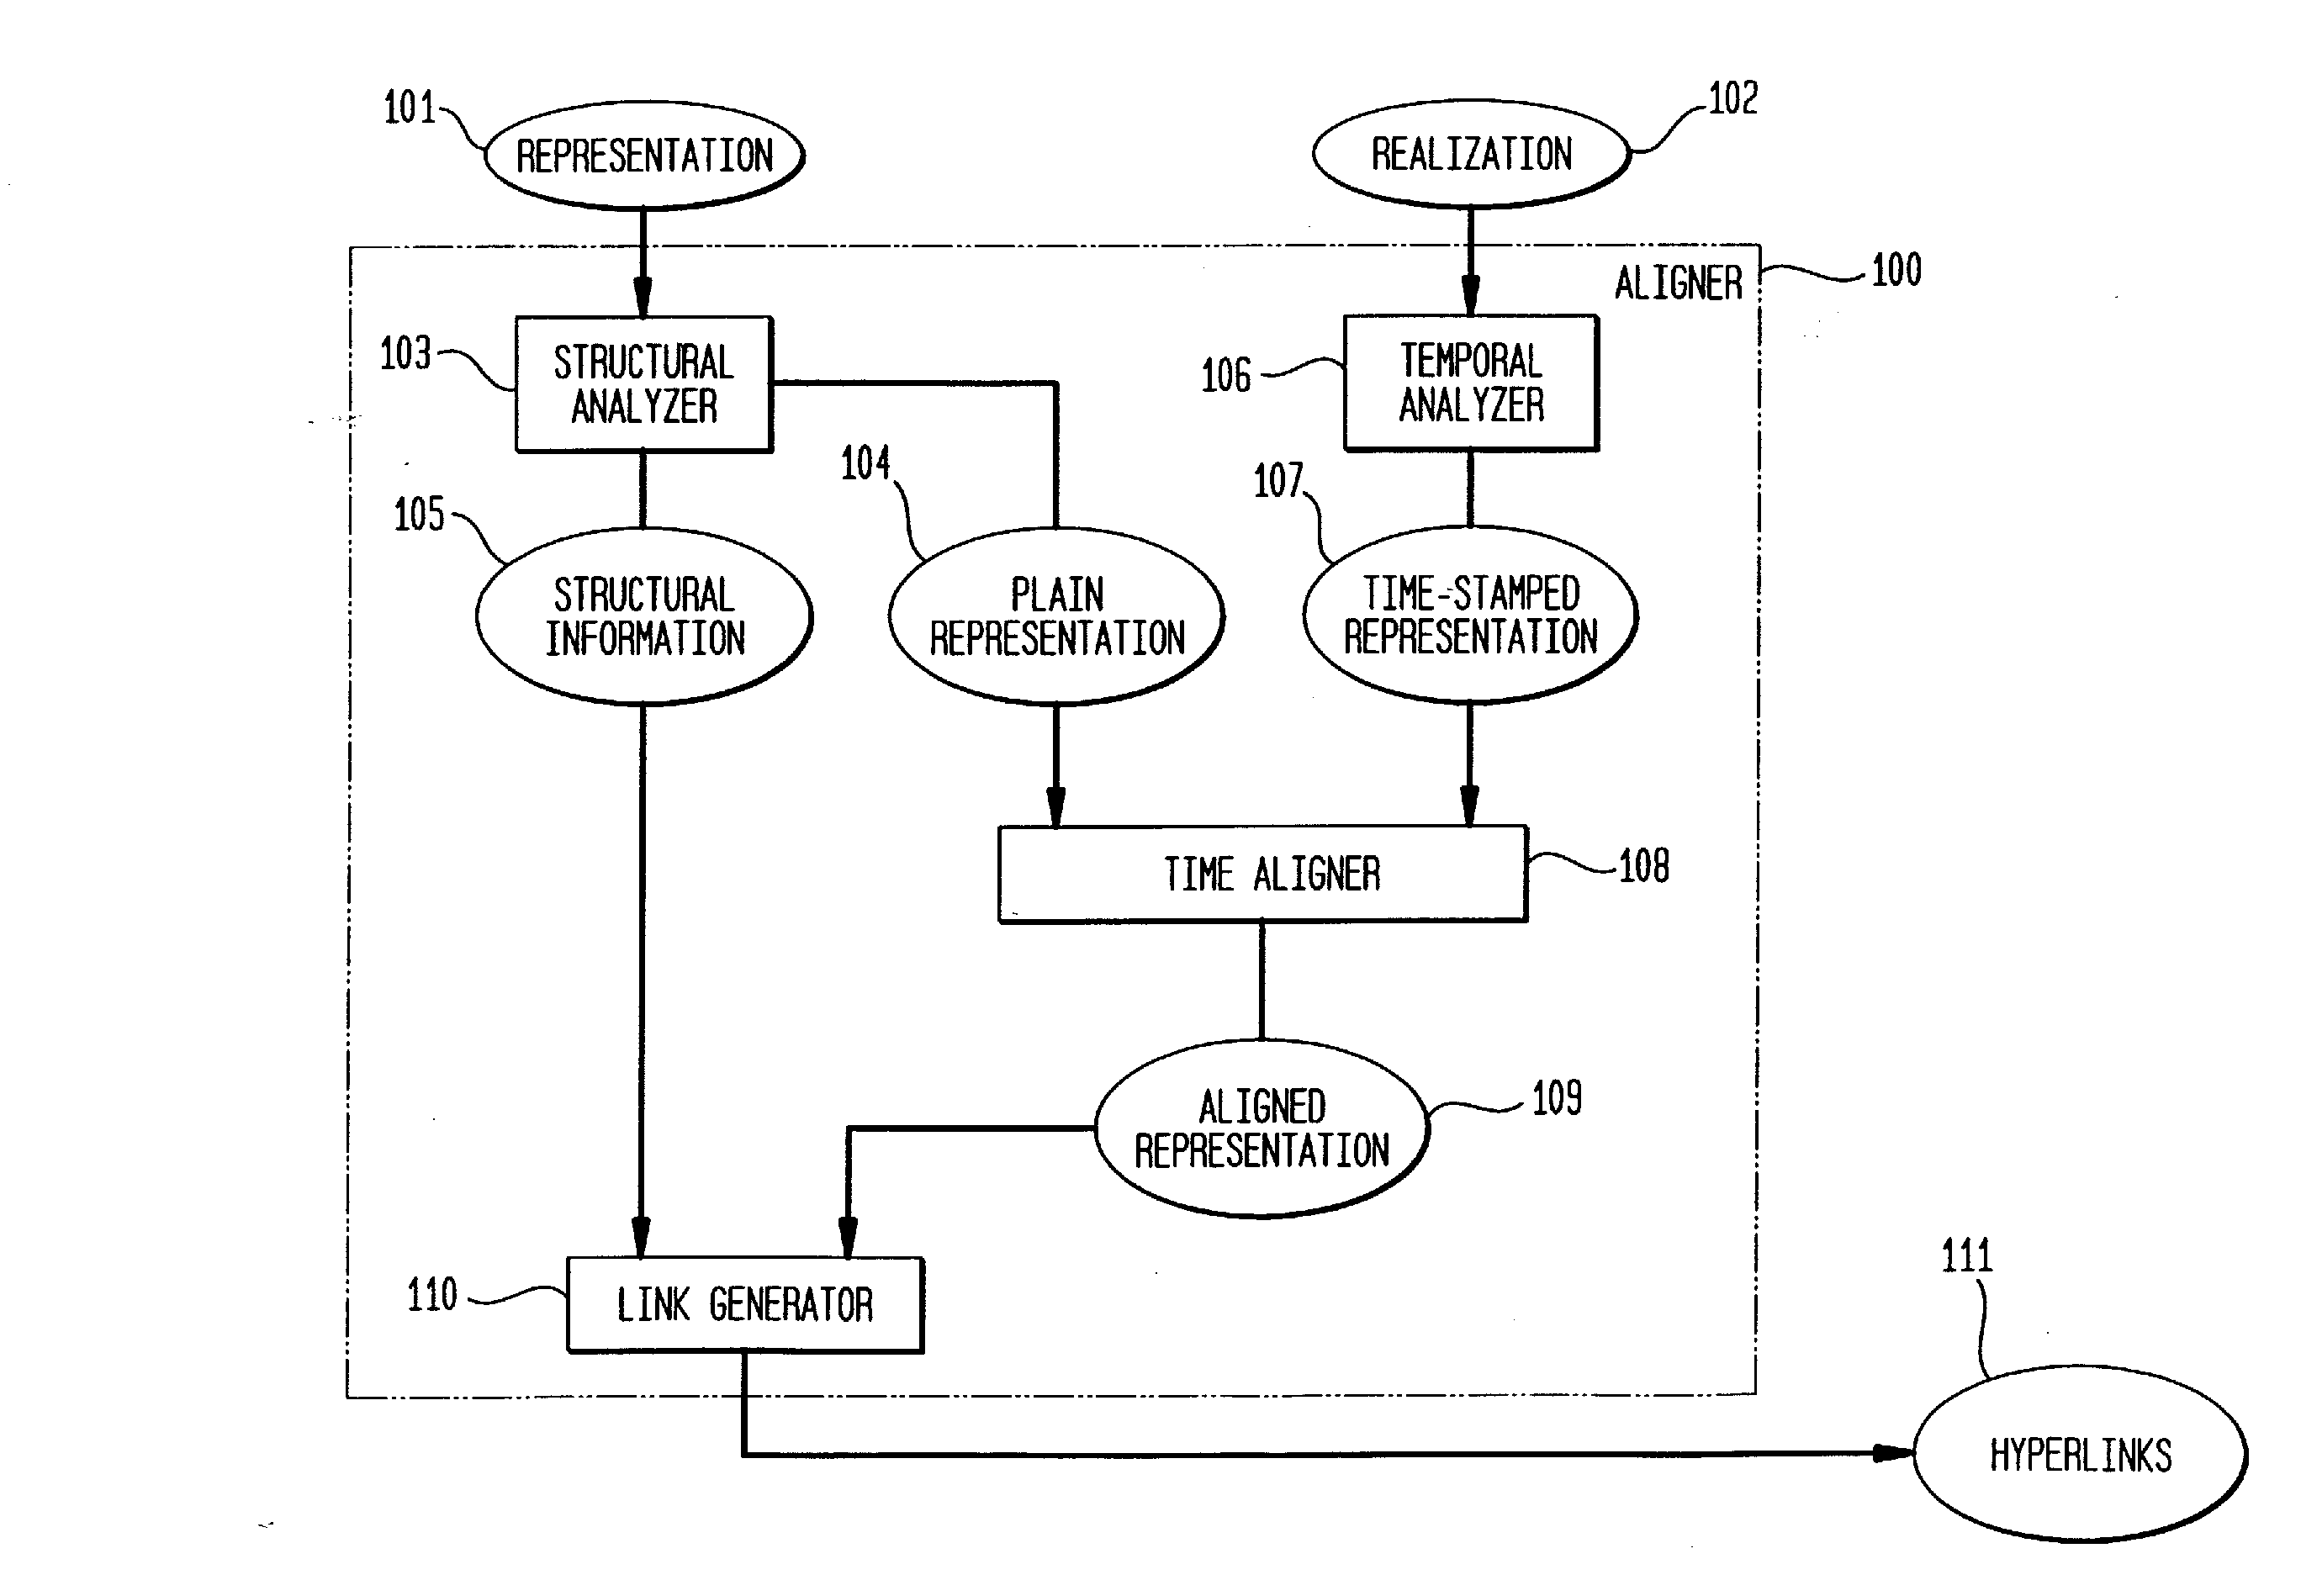 Method and apparatus for linking representation and realization data